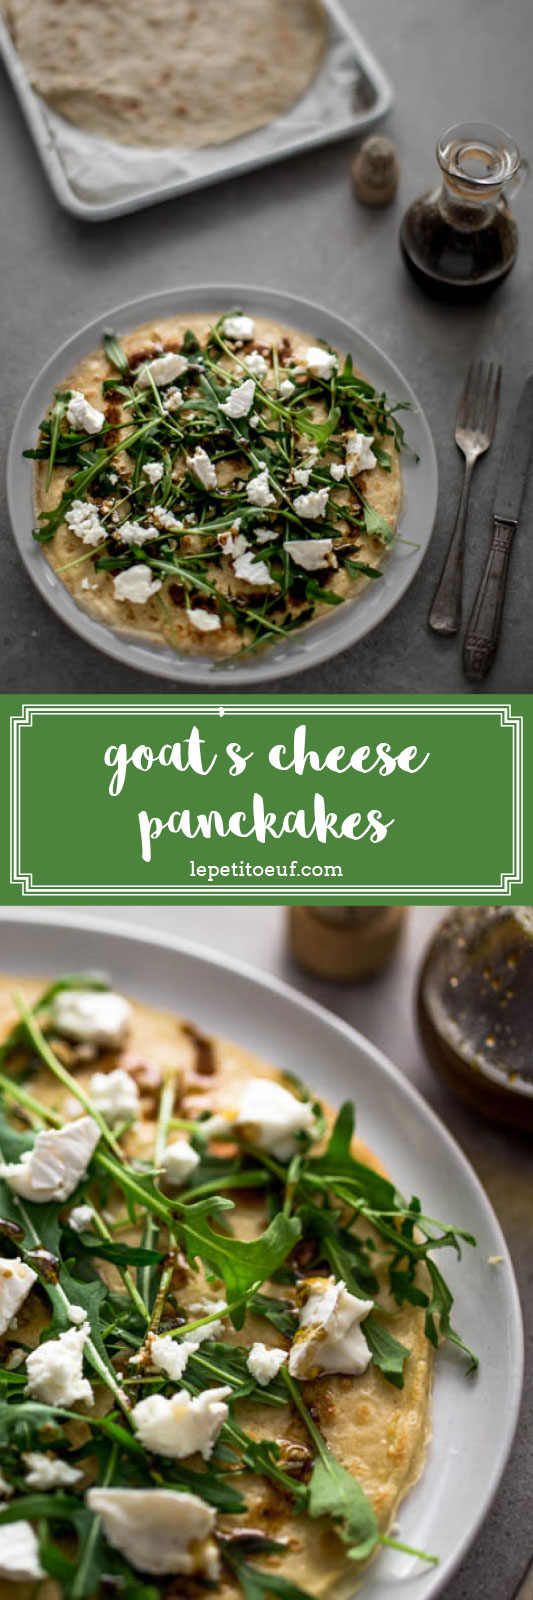 Whether it's shrove tuesday or any other tuesday, you can always eat pancakes! Topped with crumbled goat's cheese, rocket and a rich, sweet pomegranate olive oil dressing, these savoury pancakes need very little prep so make an easy dinner. You can use the maple syrup on the next one!